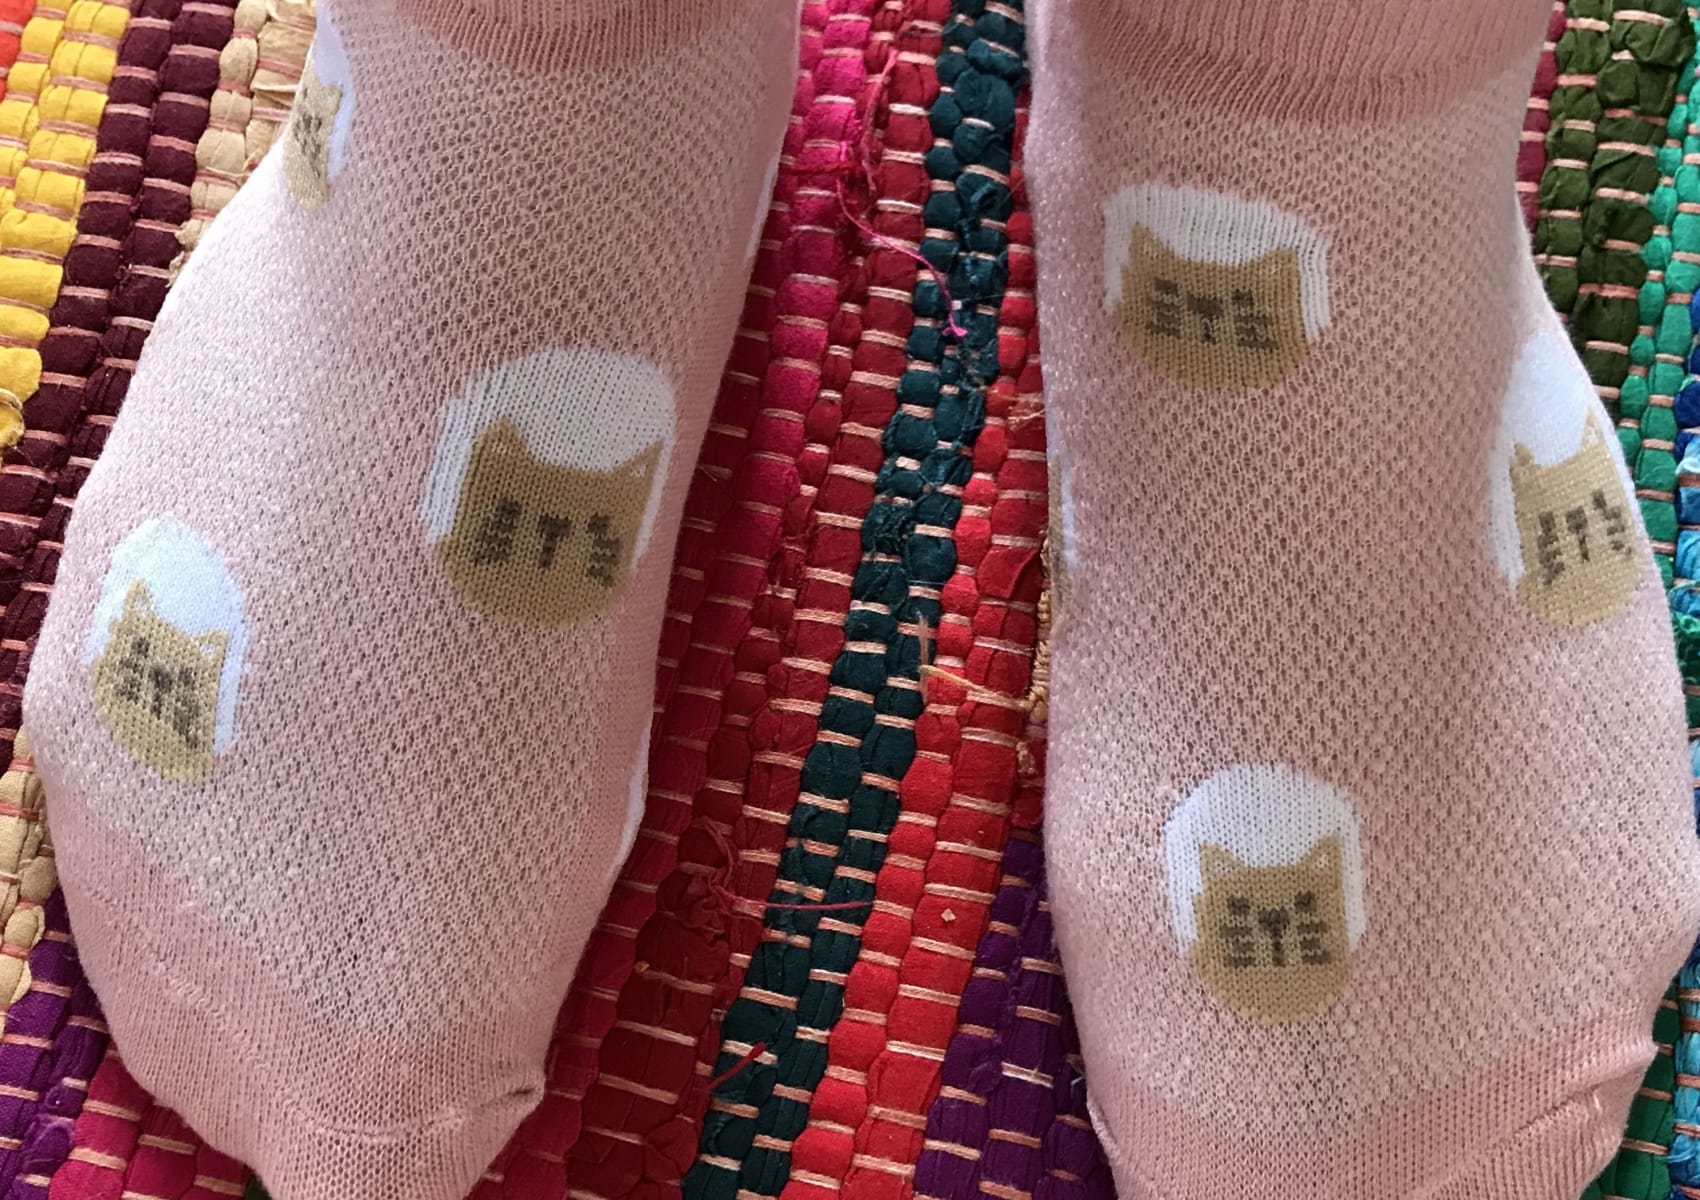 Pale pink shortie  socks with cute brown cat face